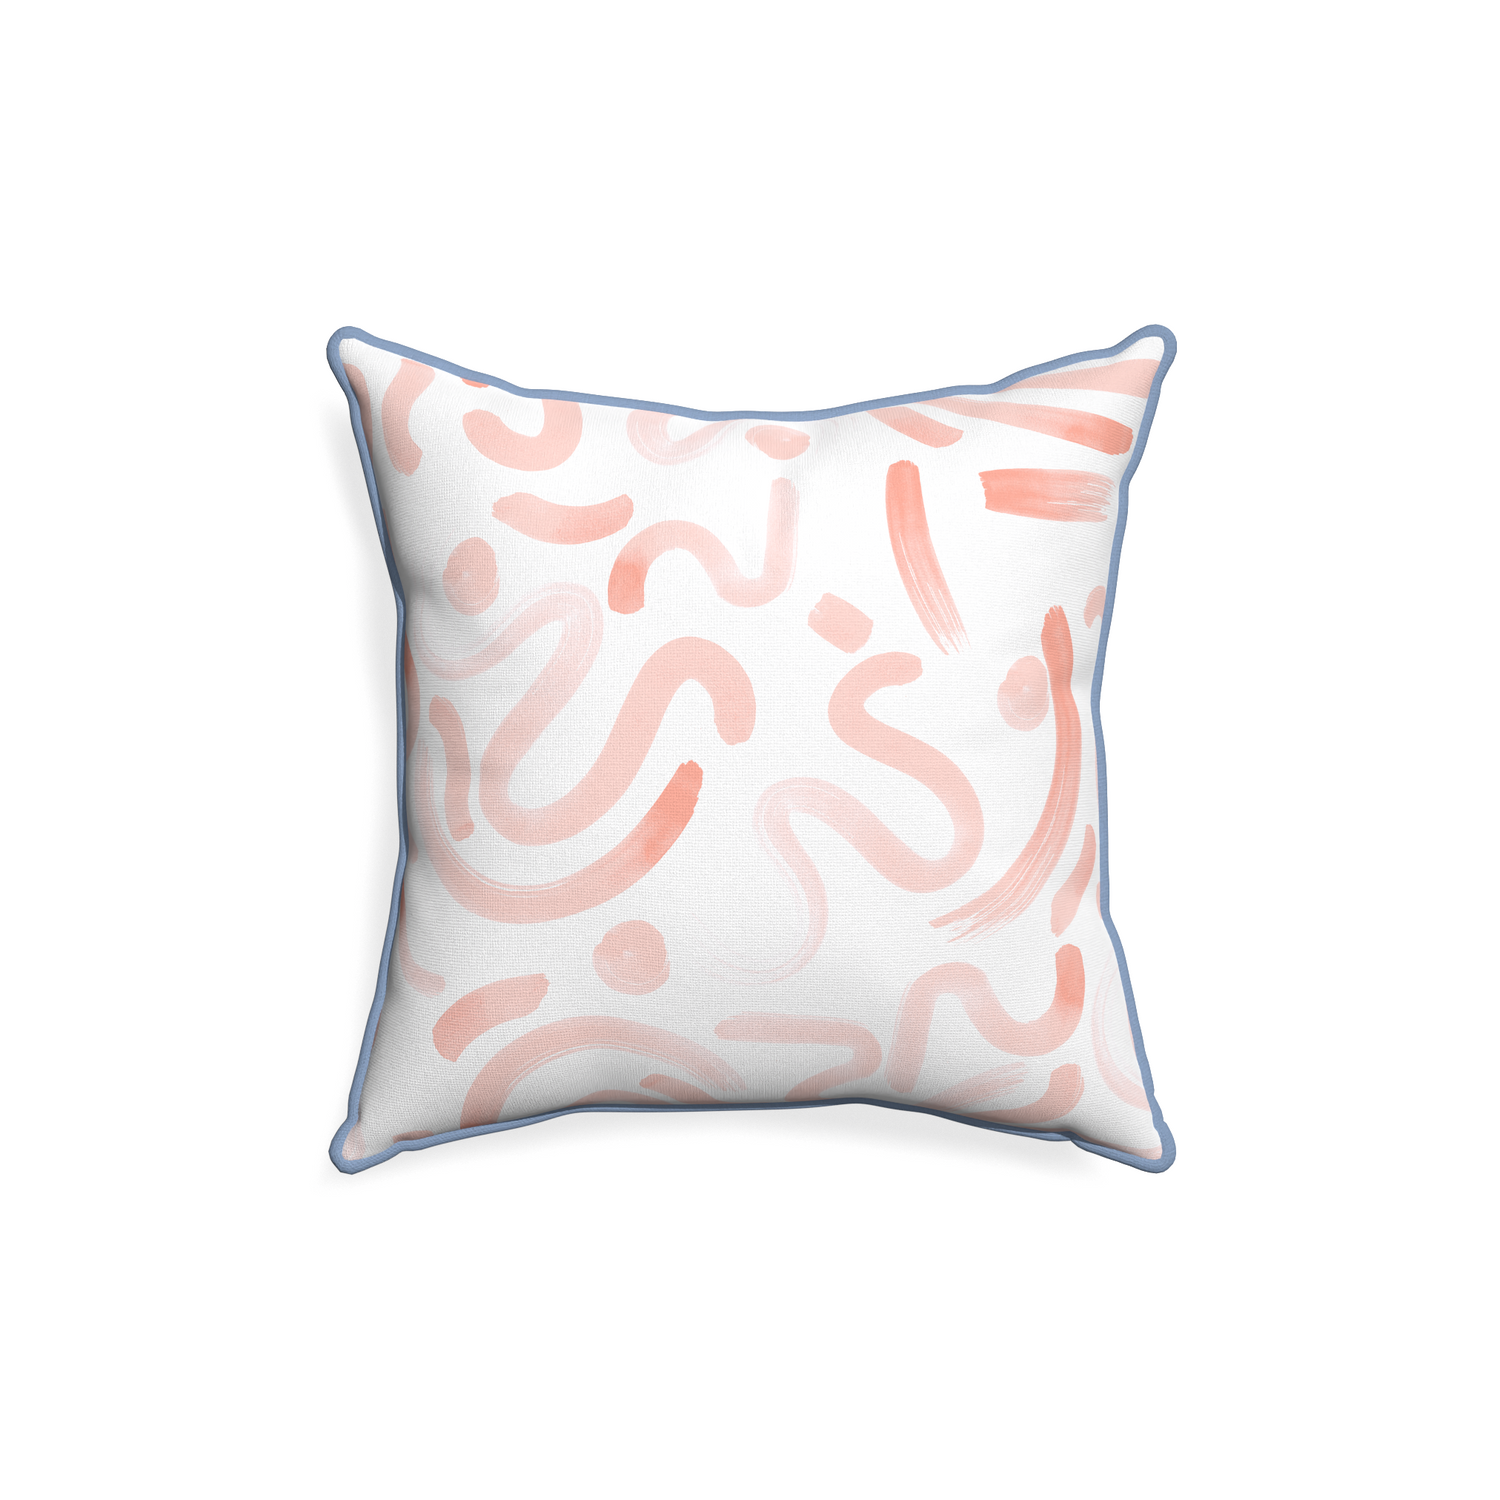 18-square hockney pink custom pink graphicpillow with sky piping on white background